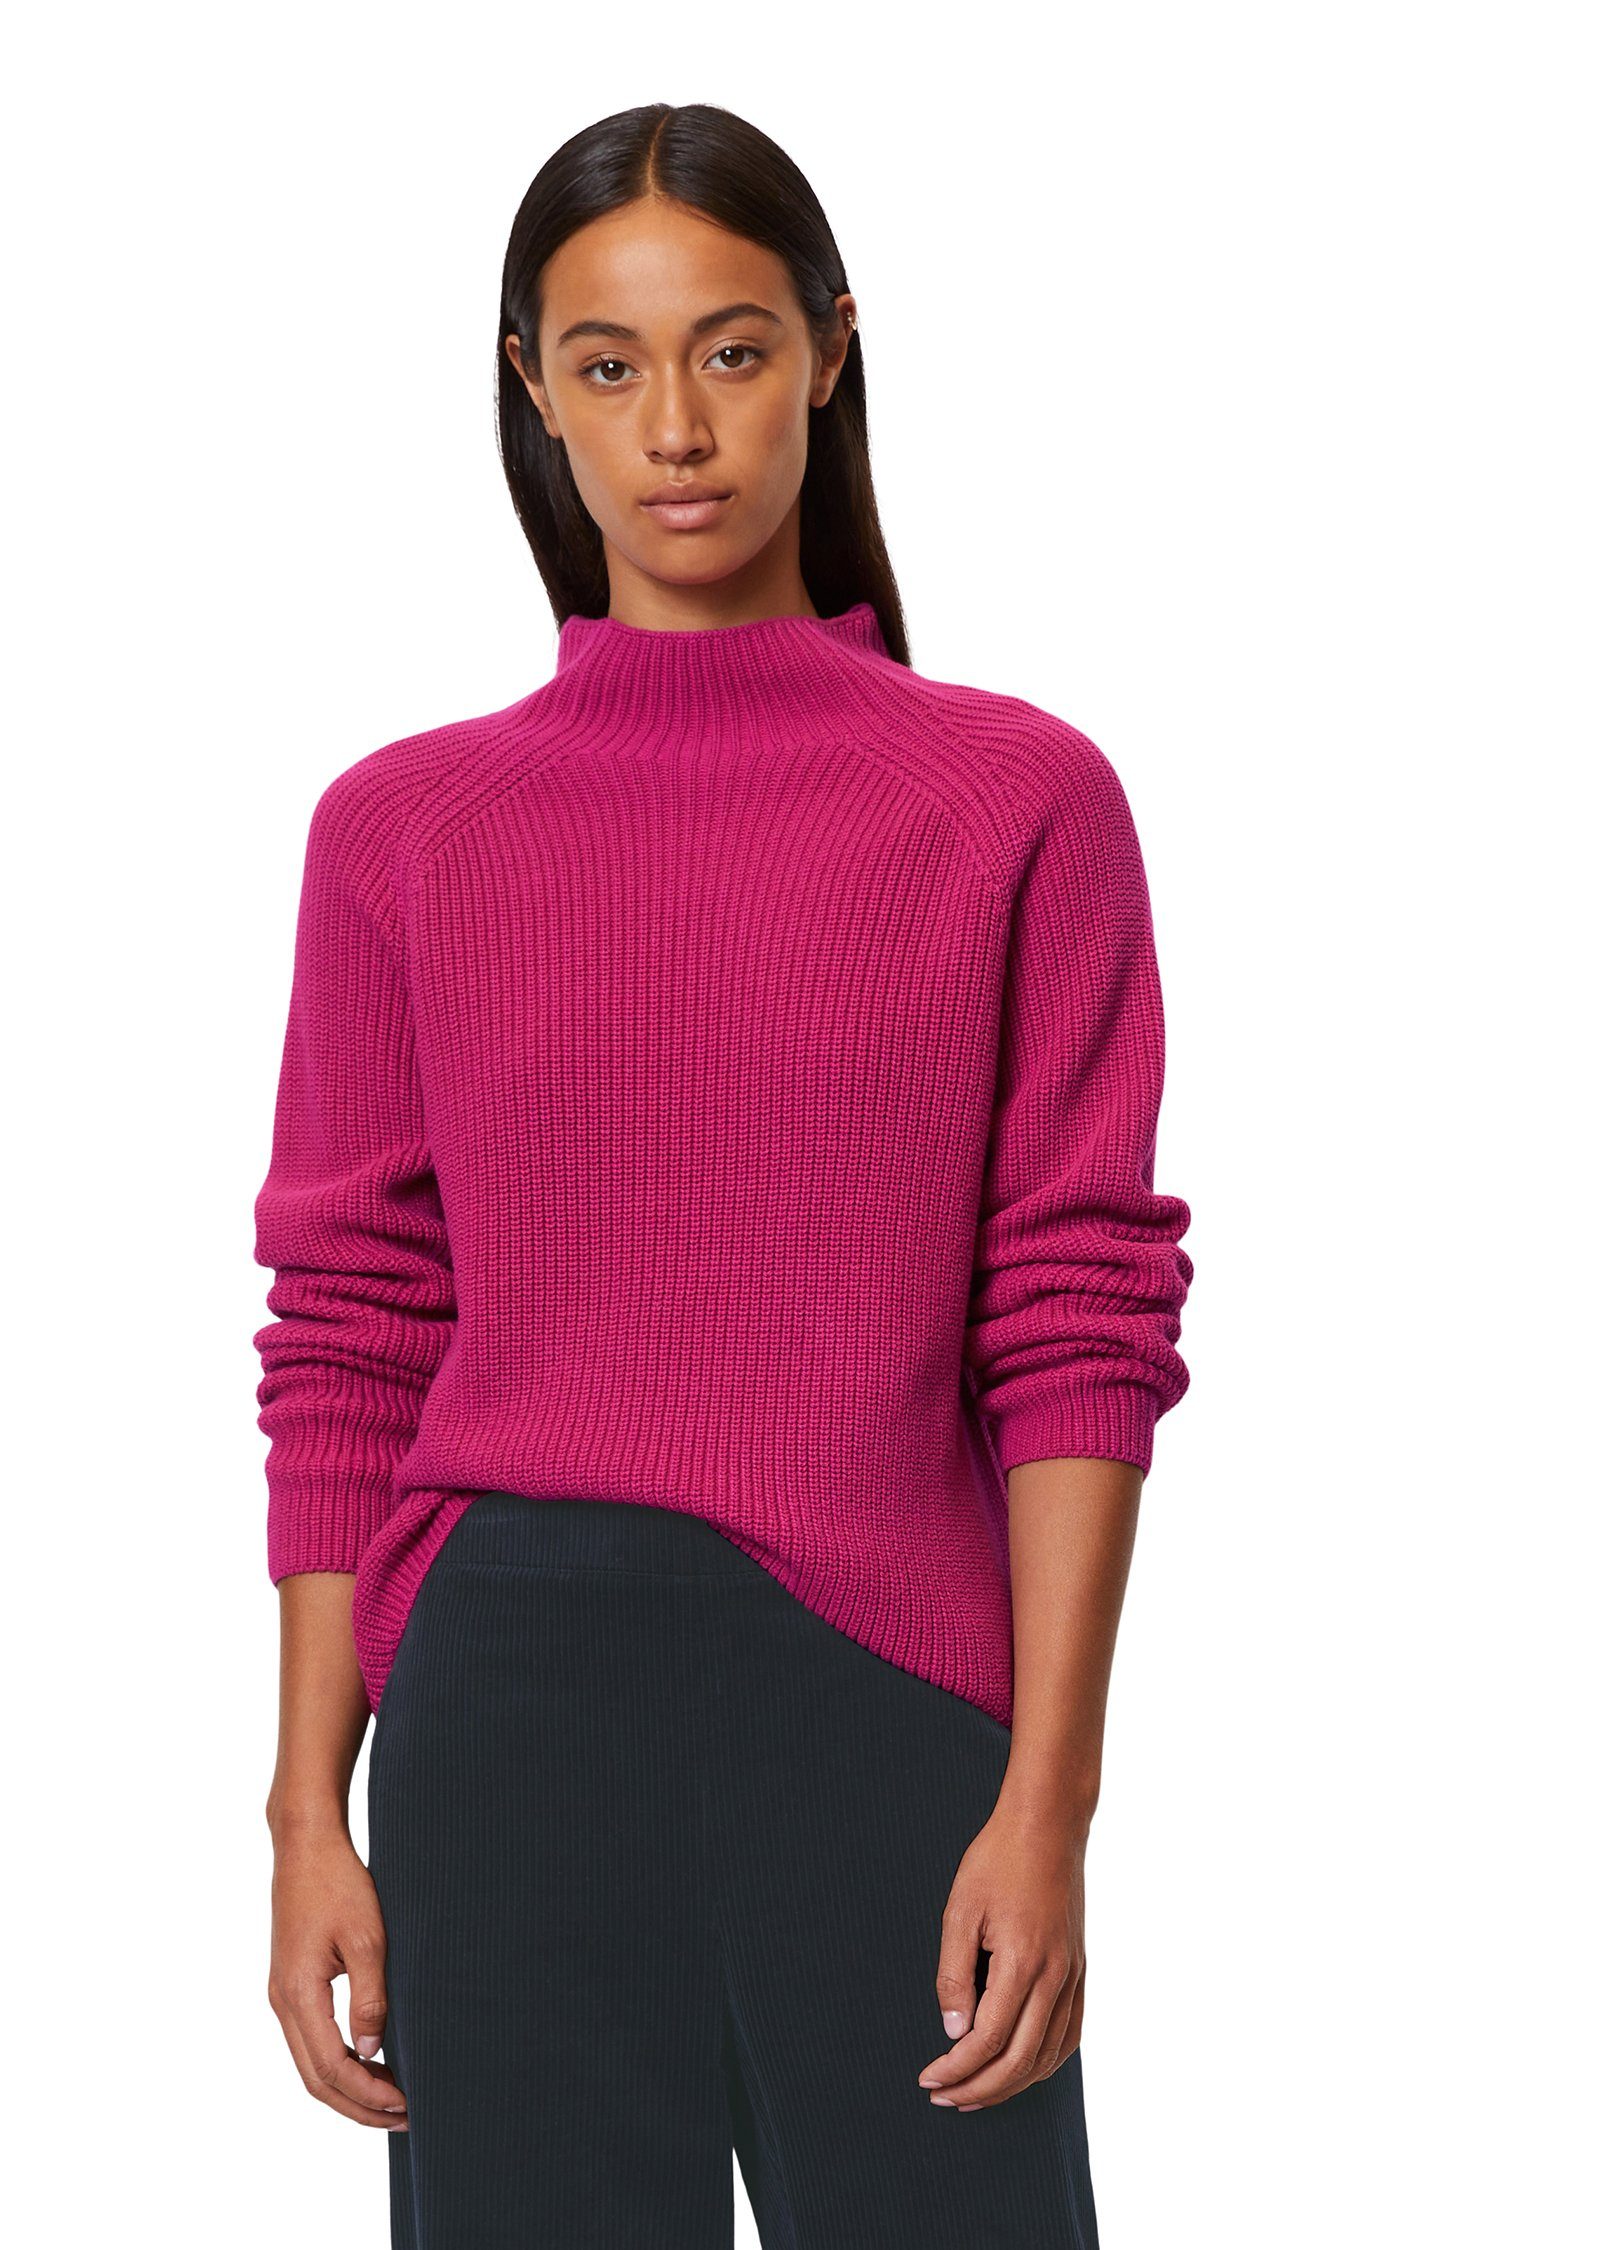 Marc O'Polo Strickpullover vibrant pink | 